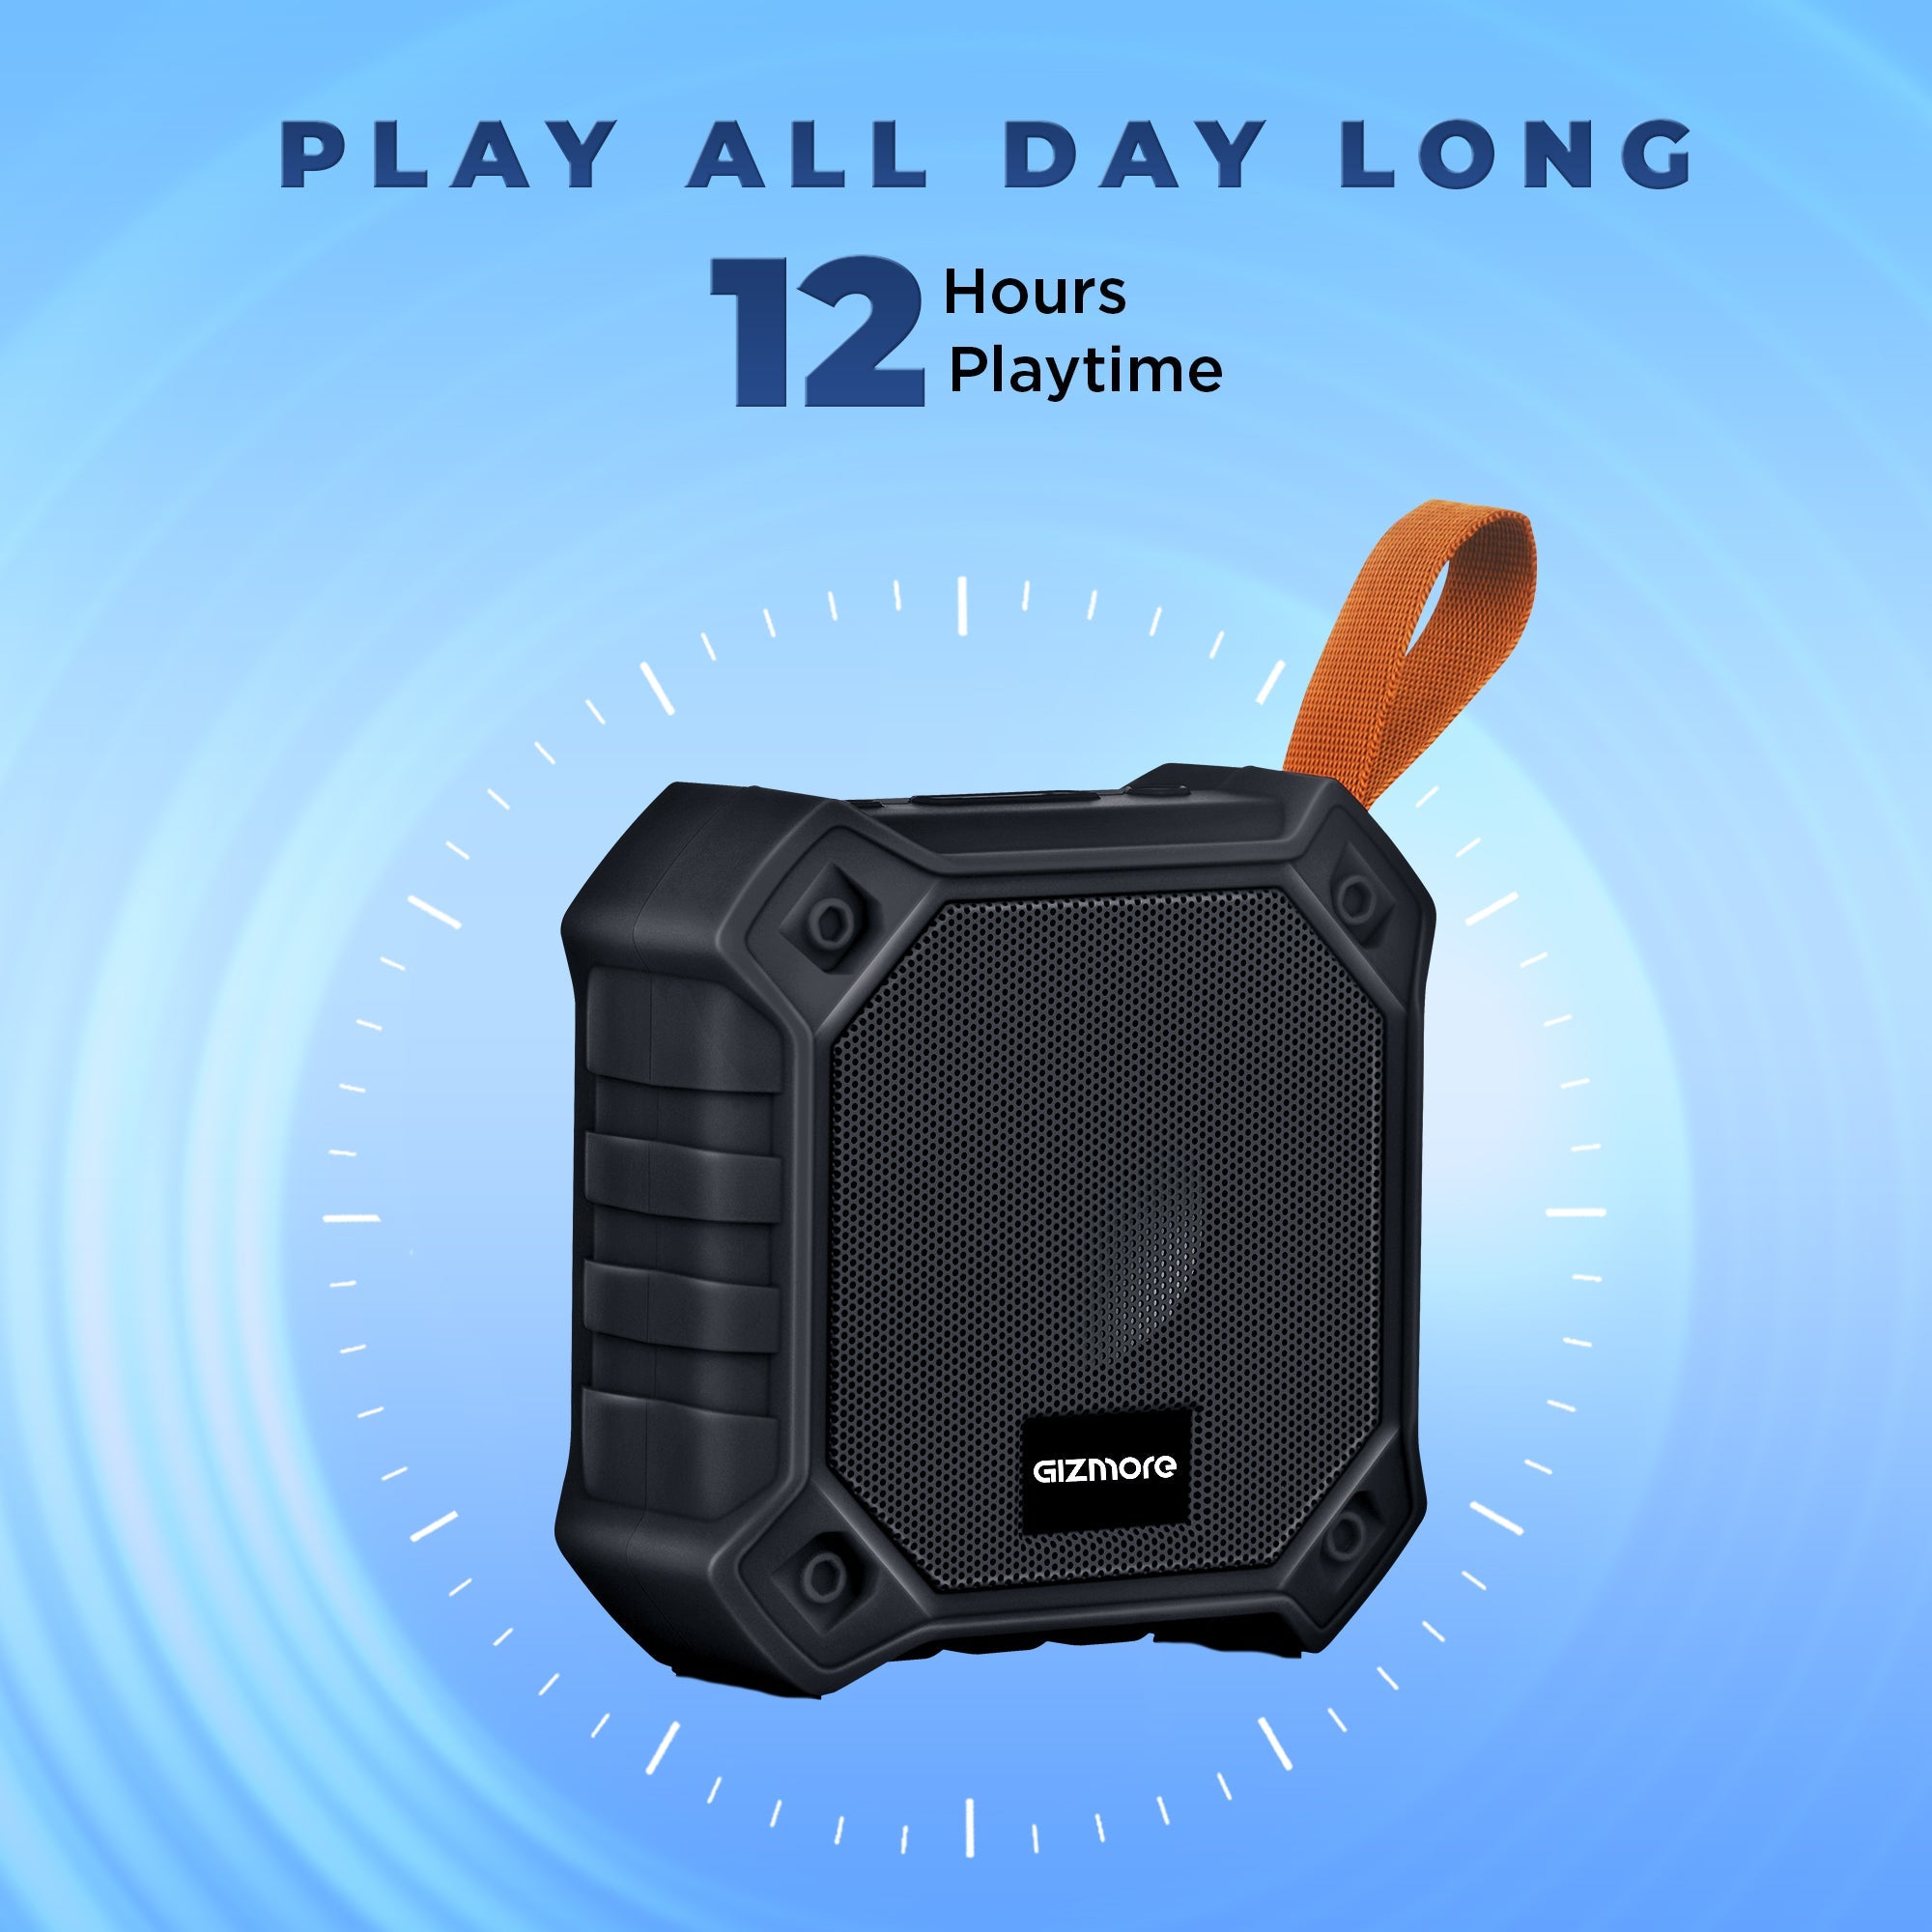 GIZMORE Cube 5W Wireless Bluetooth Portable Speaker| Play Back Time 12hrs|In-Built Mic for Calling |TWS Function|52MM Dynamic Bass Driver| Multiple connectivity BT, SD Card & USB (Black)